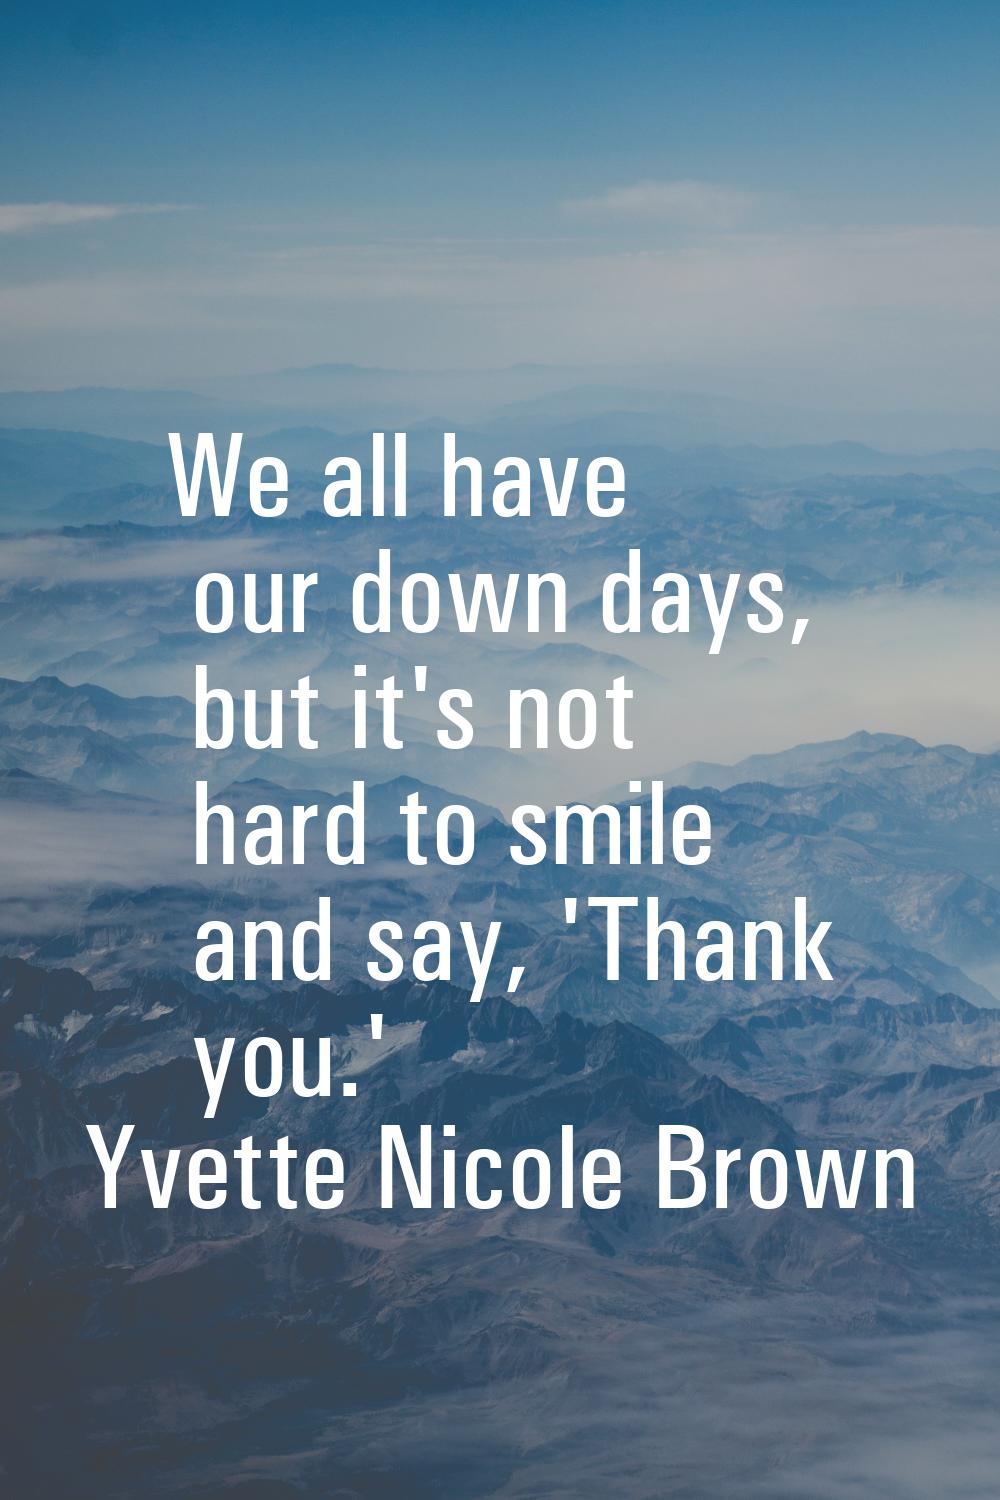 We all have our down days, but it's not hard to smile and say, 'Thank you.'